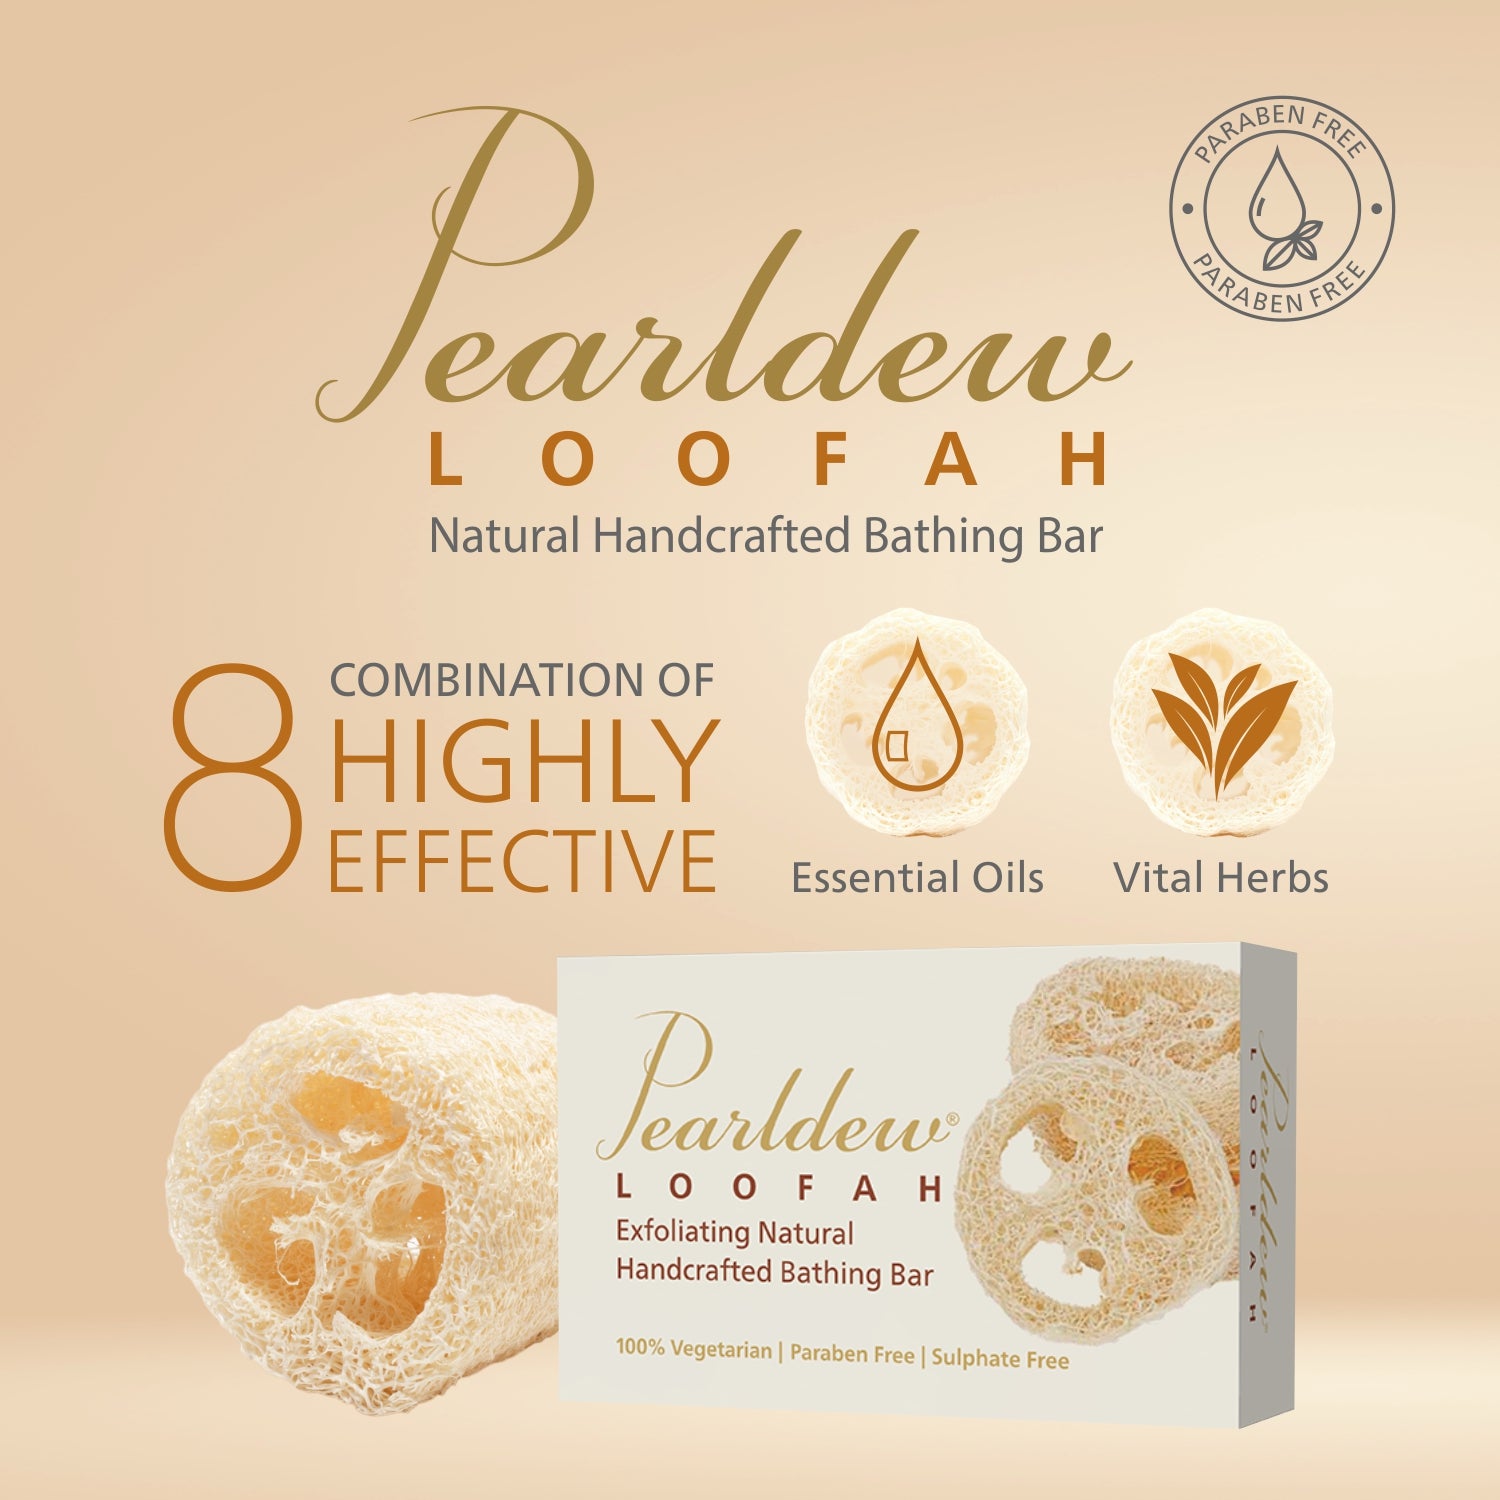 Pearldew Loofah Exfoliating Natural Handcrafted Bathing Bar (75 gm)